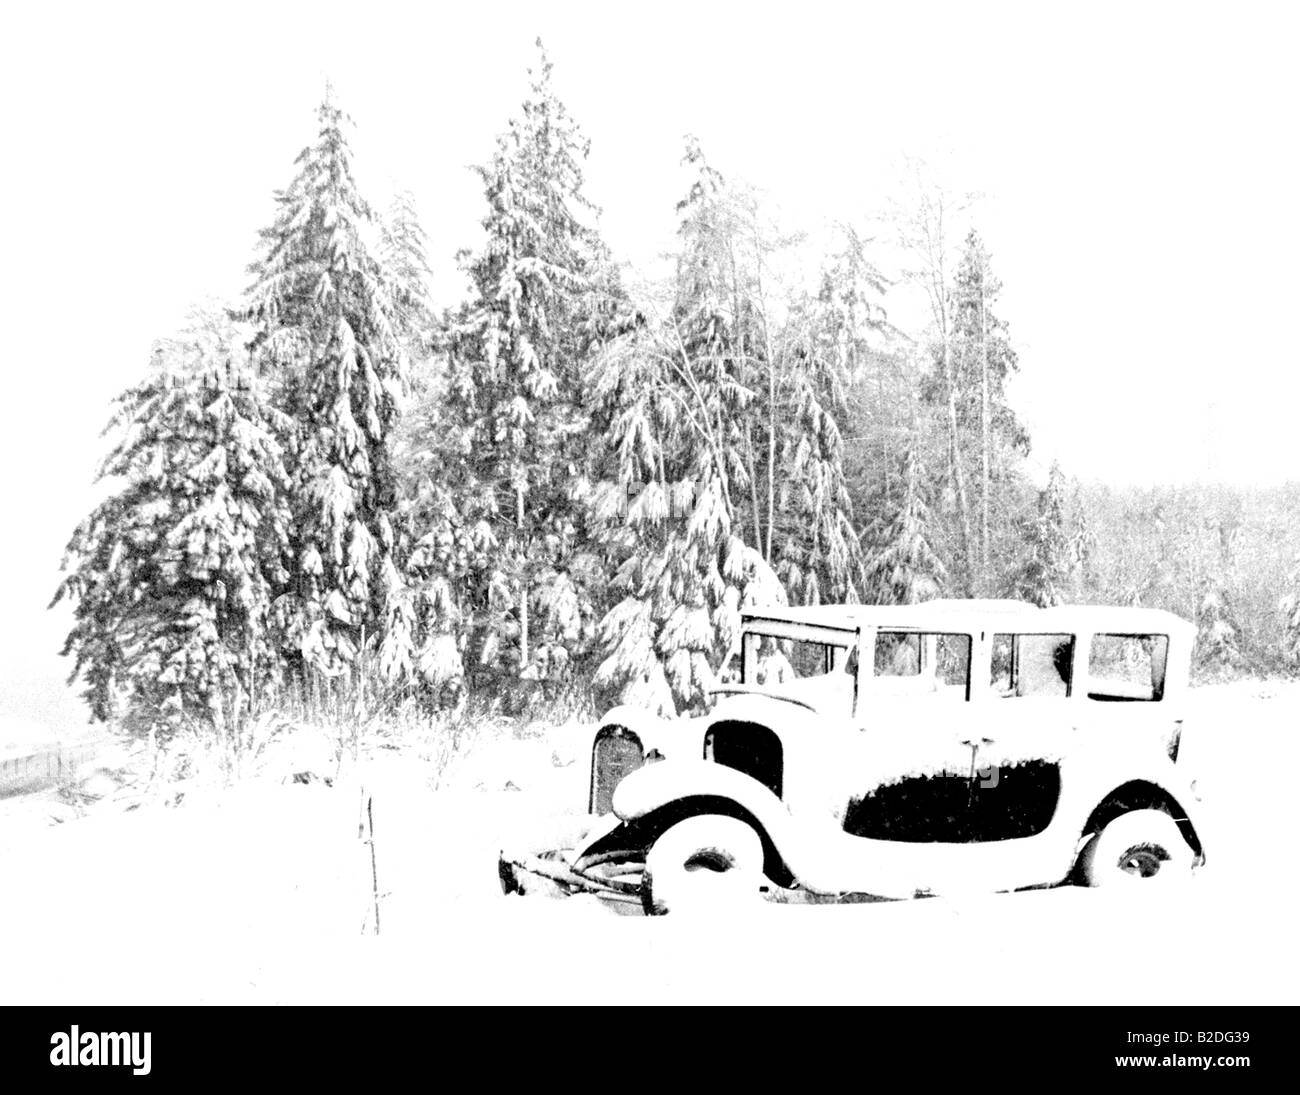 Yesterday's Dream Old Ford Model T Automobile Car sits in the Snow by trees Vintage Stock Photo